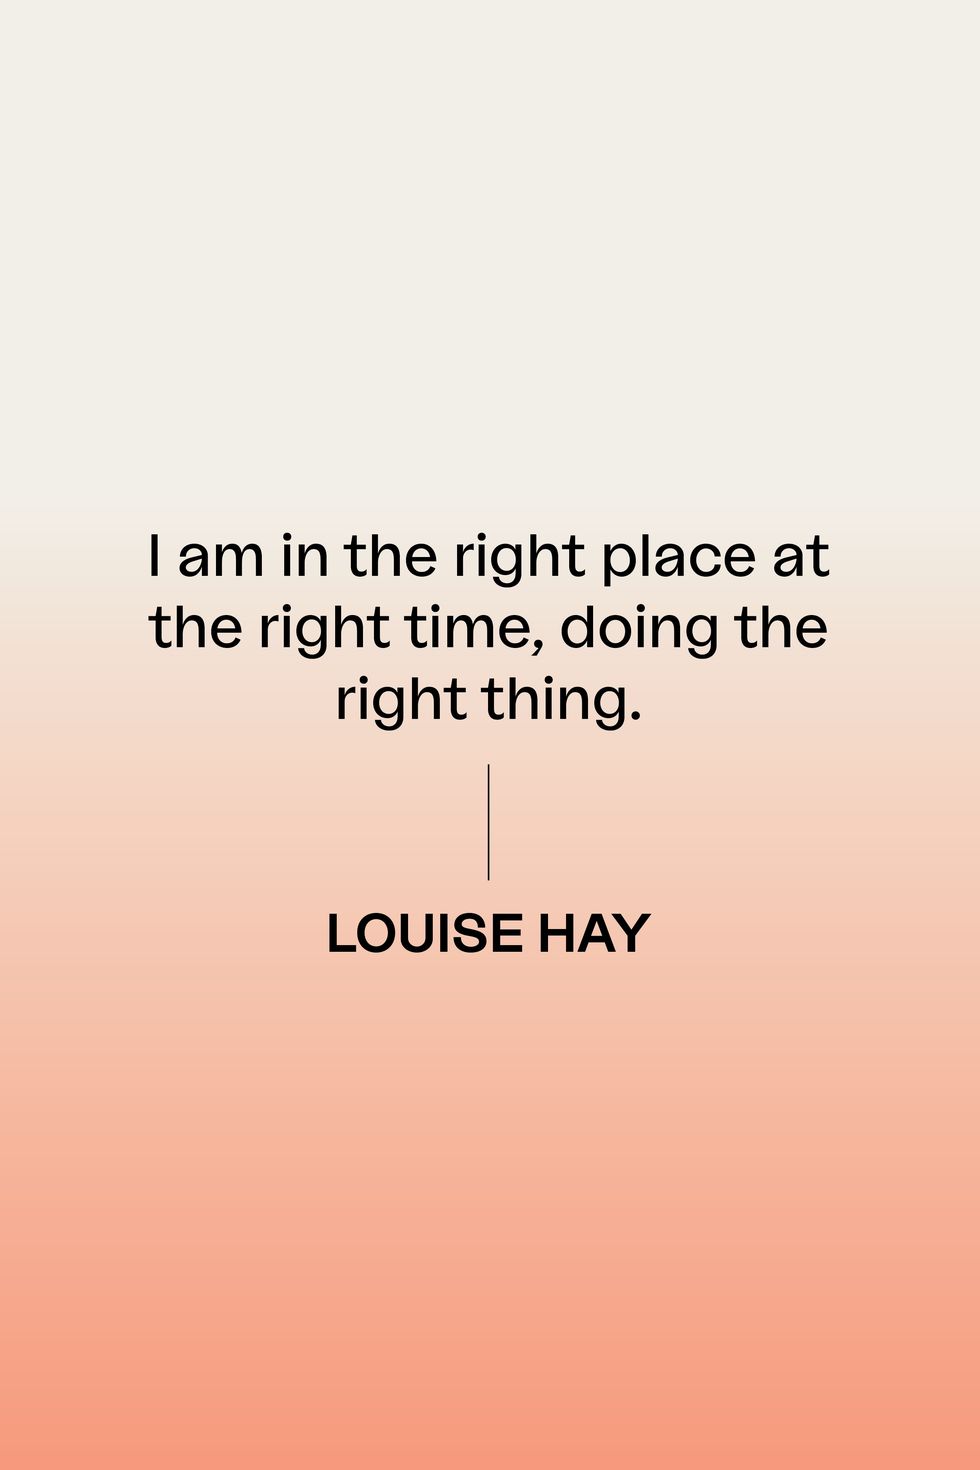 louise hay quote